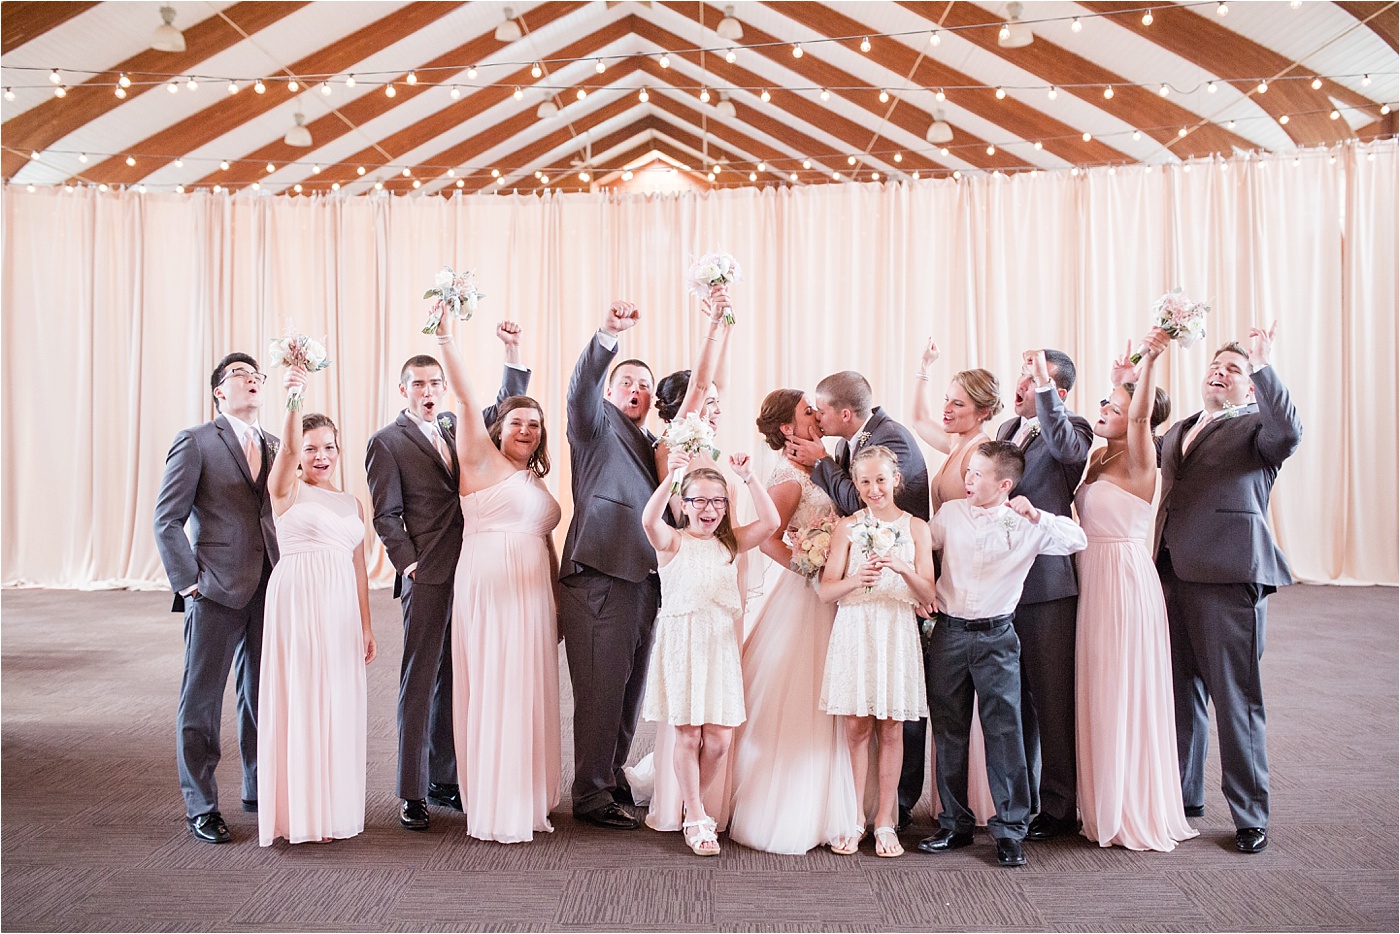 A Blush Outdoor wedding at Irongate Equestrian | KariMe Photography_0097